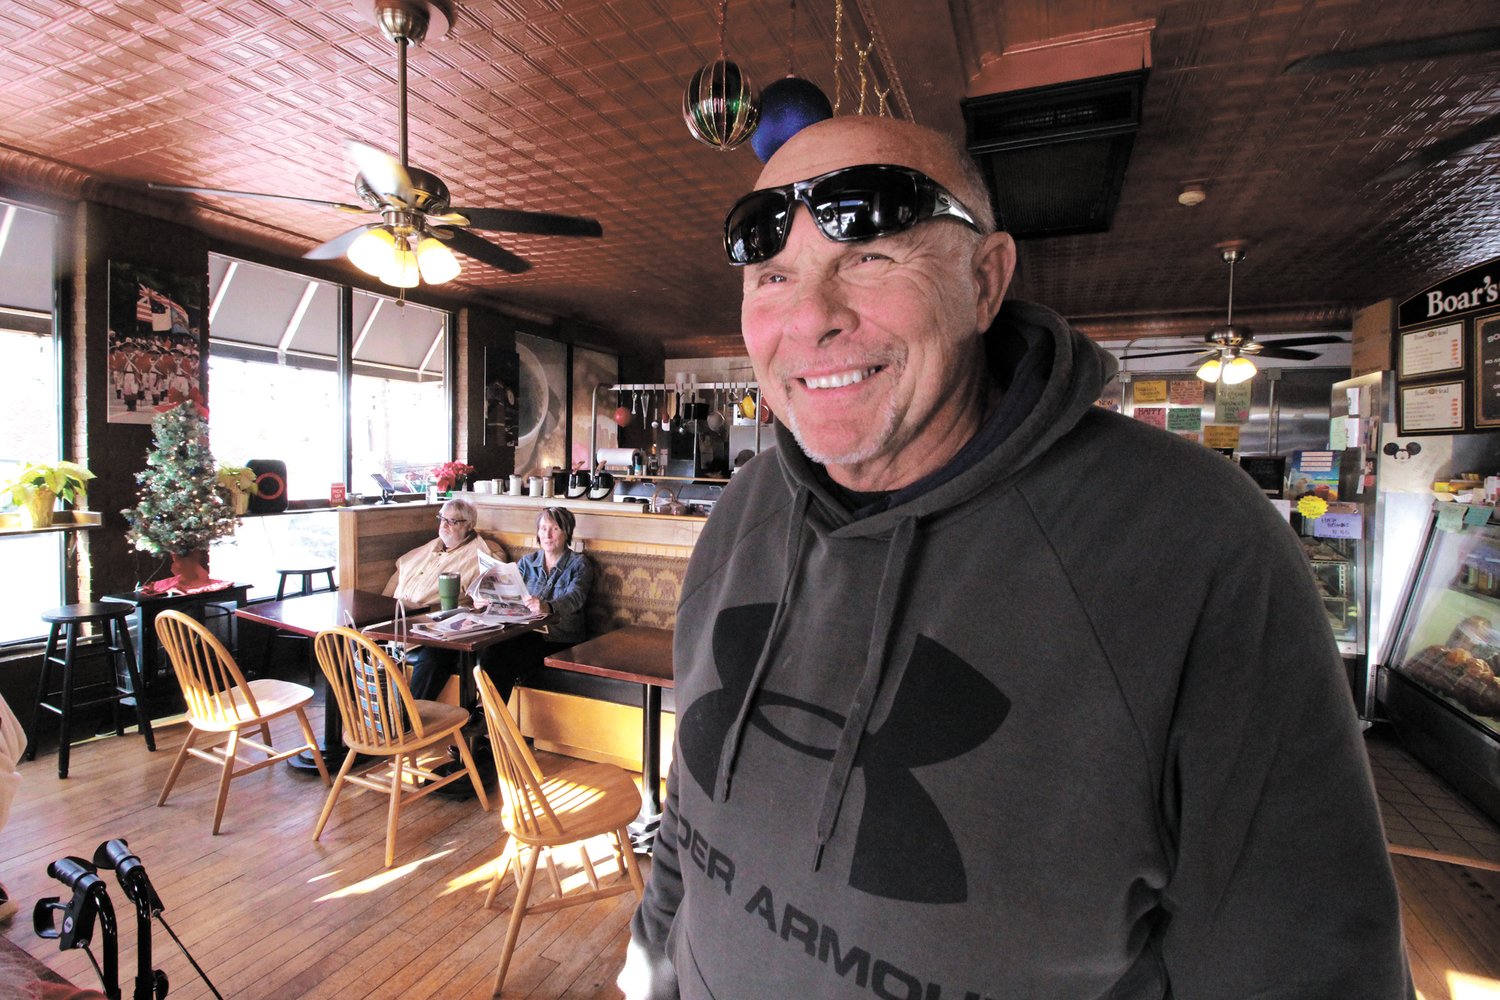 CHRISTMAS SPIRIT ABOUNDS: The business slows down but not the Christmas or village spirit says Ray Verrocchio of Bagel Express and Deli (below).